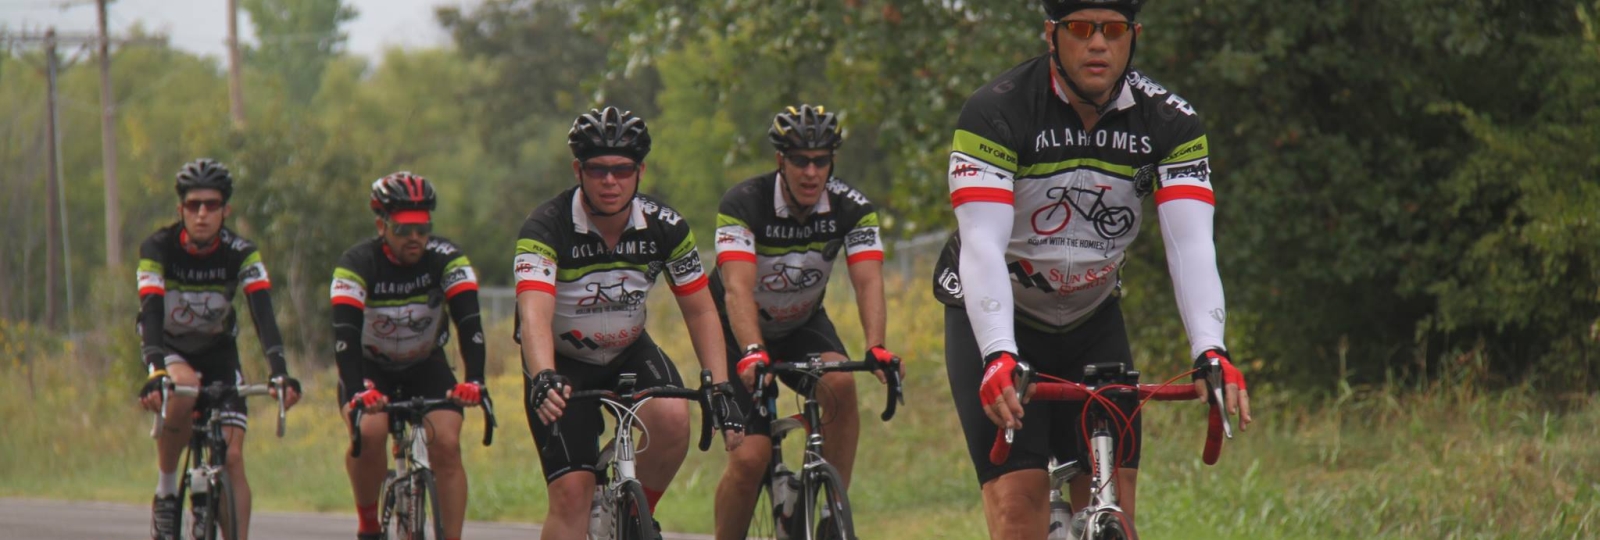 2015 Bike MS: The Road Divided